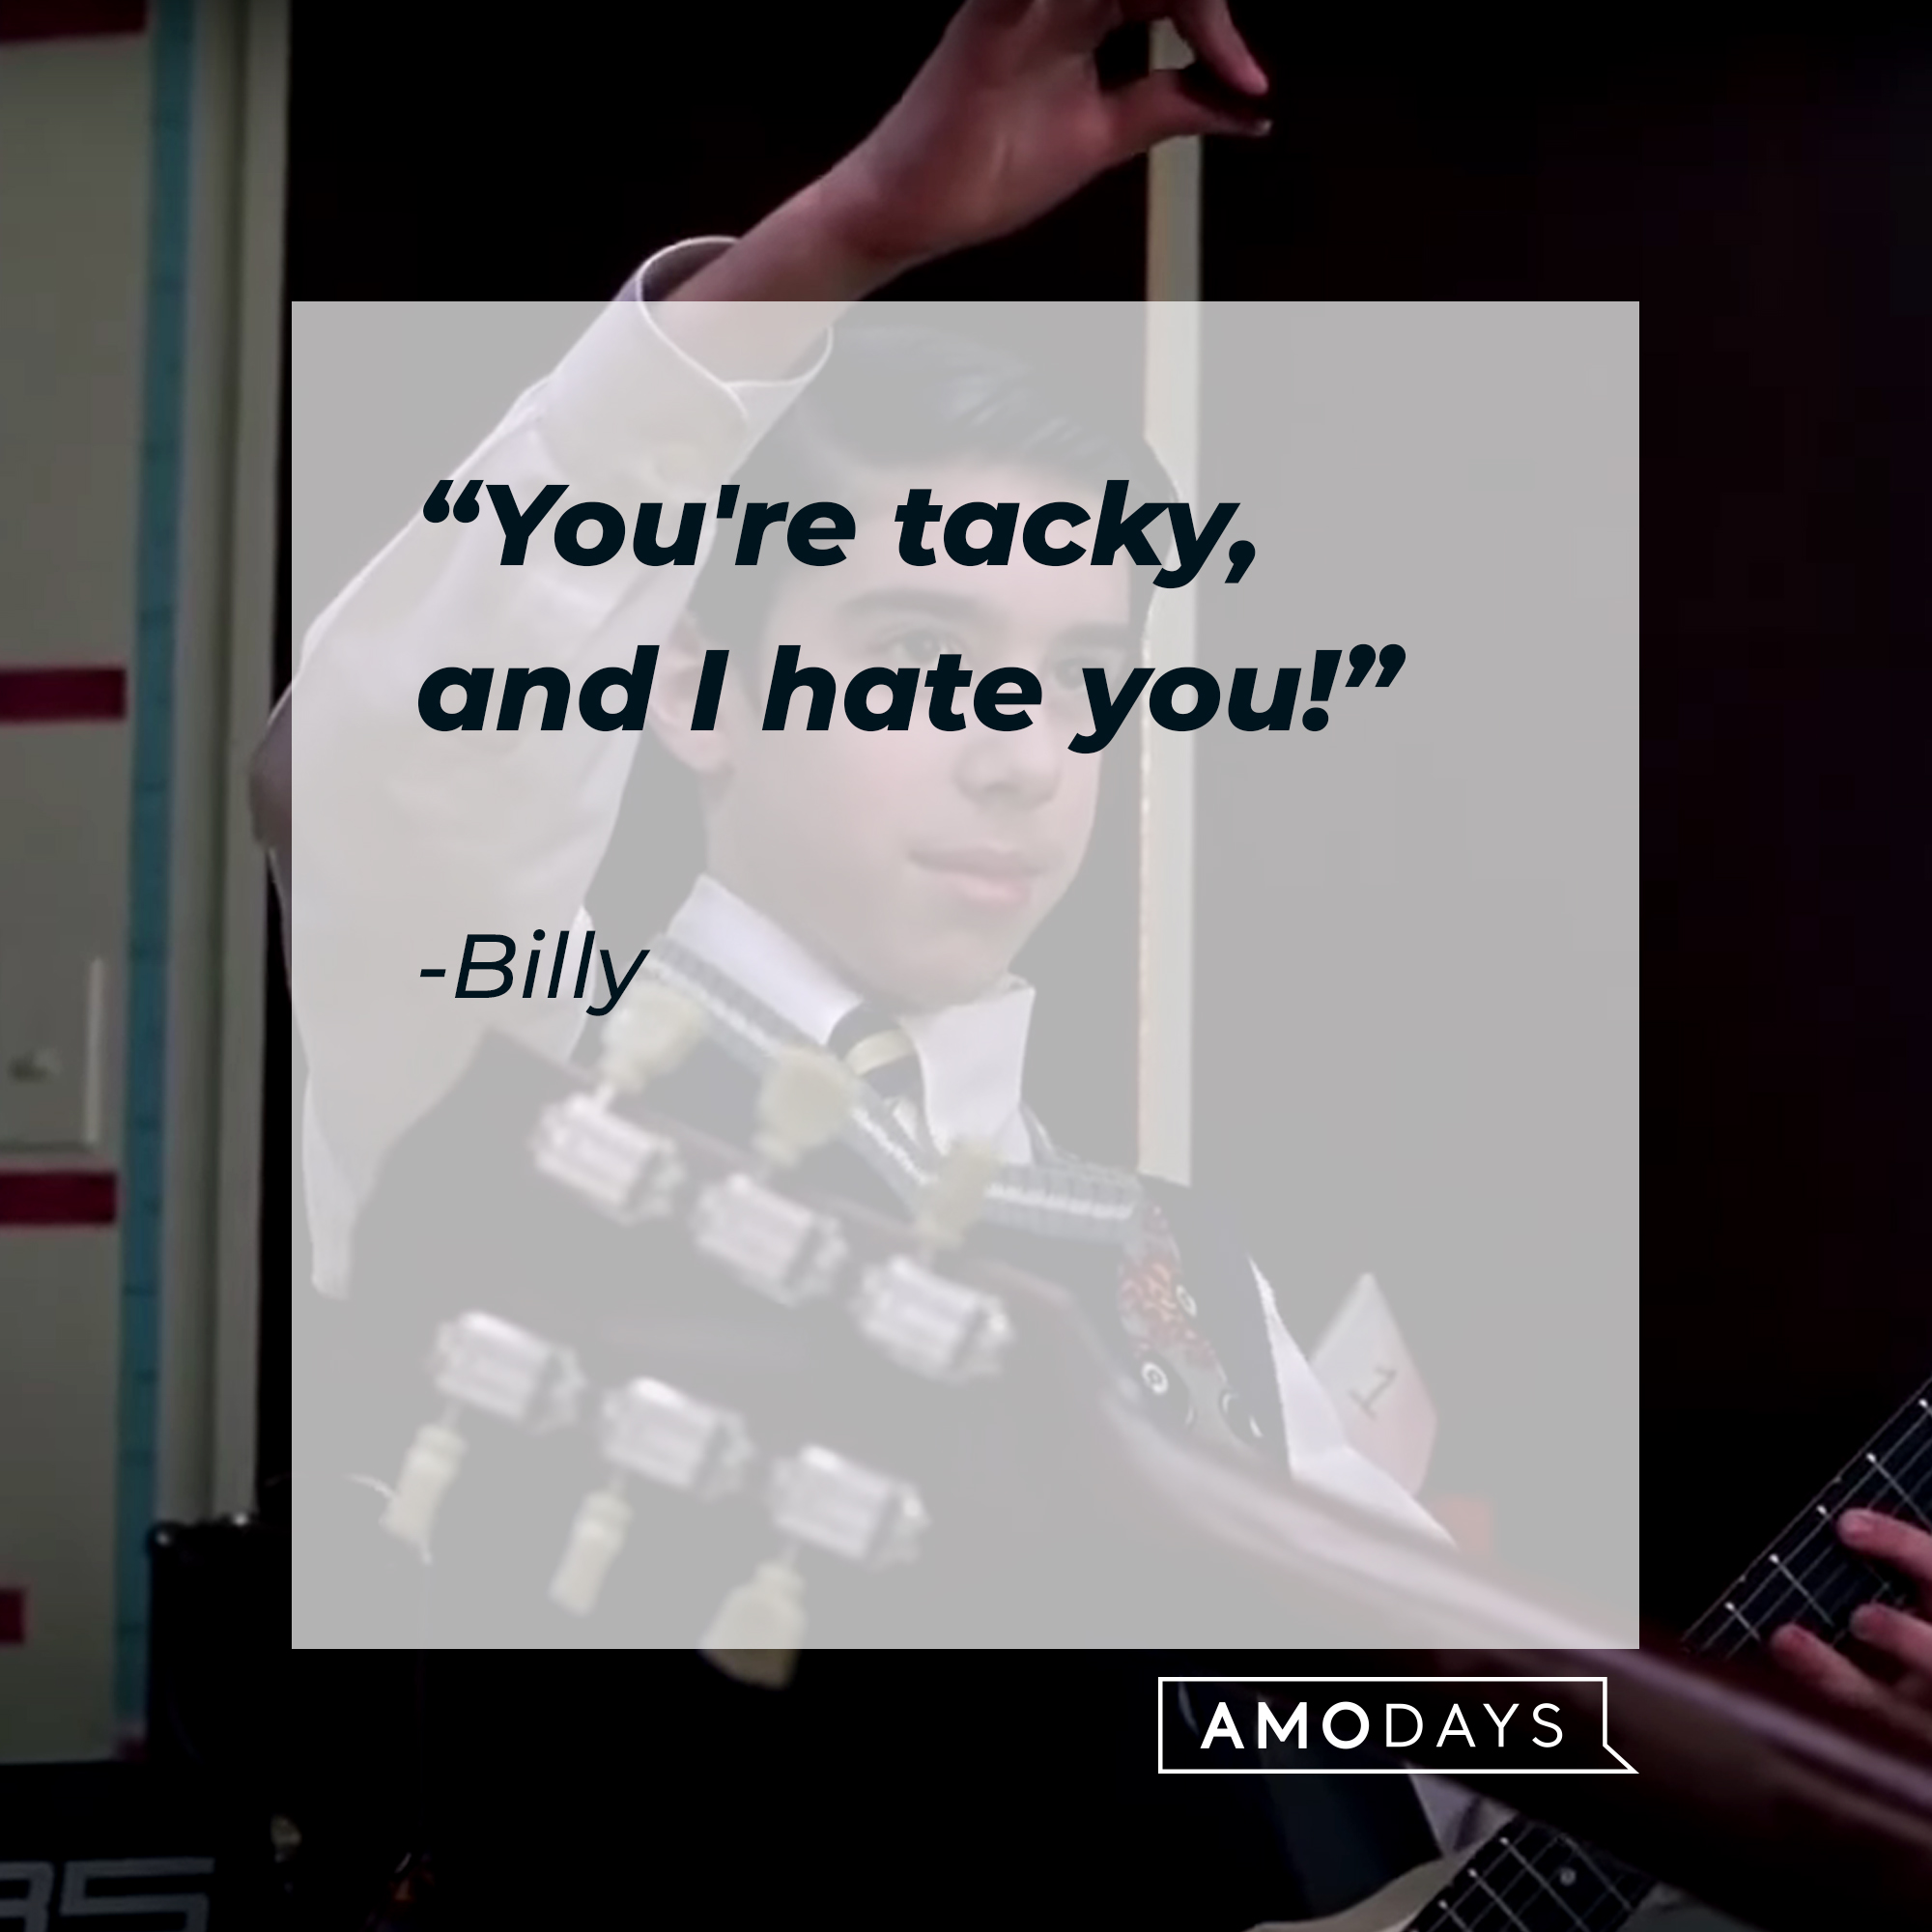 Zack, with Billy’s quote: “You're tacky, and I hate you!” | Source: youtube.com/paramountpictures